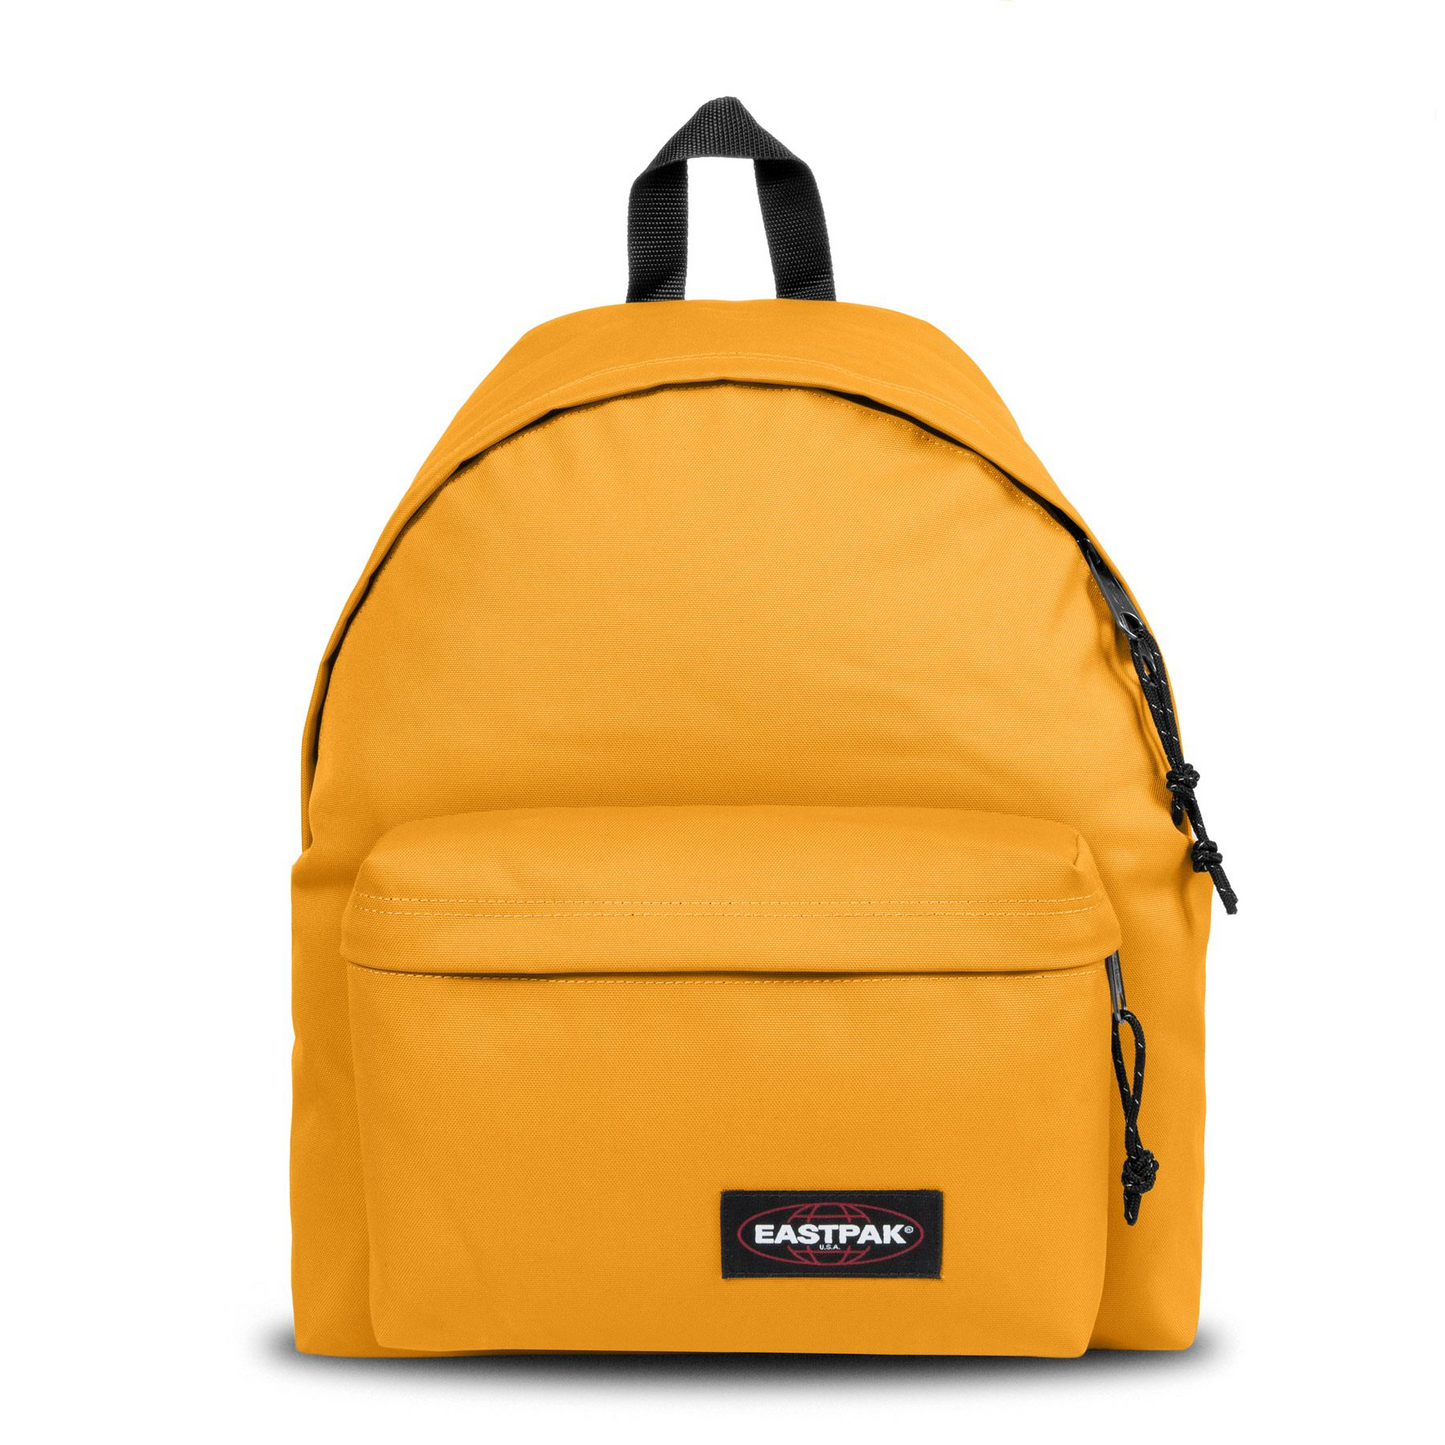 Sac à dos - Padded Pak'r® Young Yellow